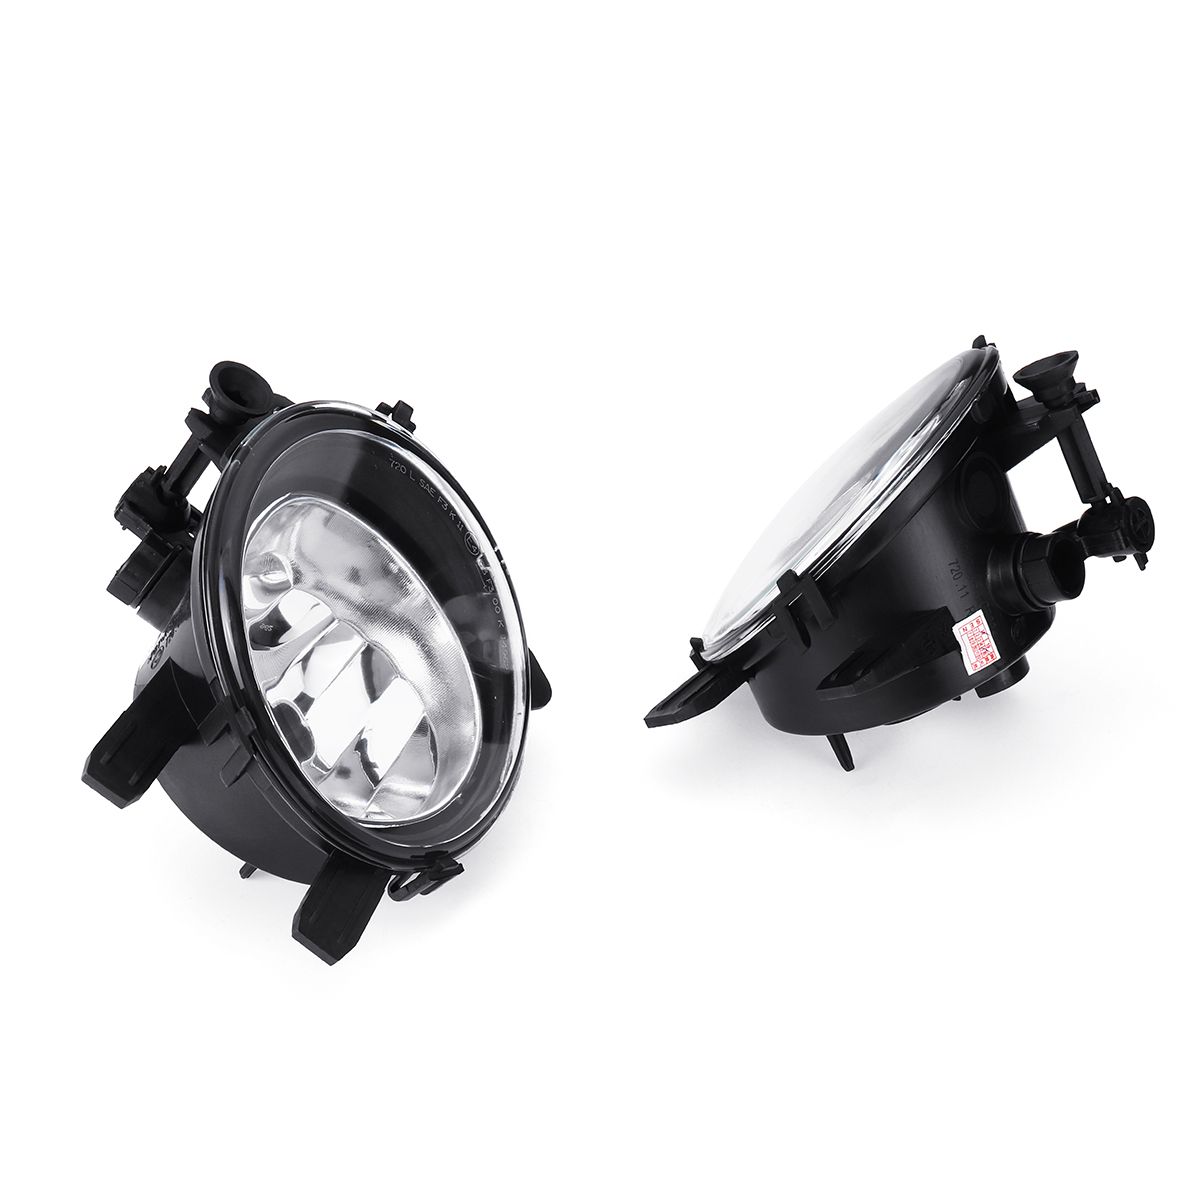 Front-LeftRight-Fog-Light-Lamp-Case-For-BMW-3-Series-F22-F30-F35-2012-2015-1732036